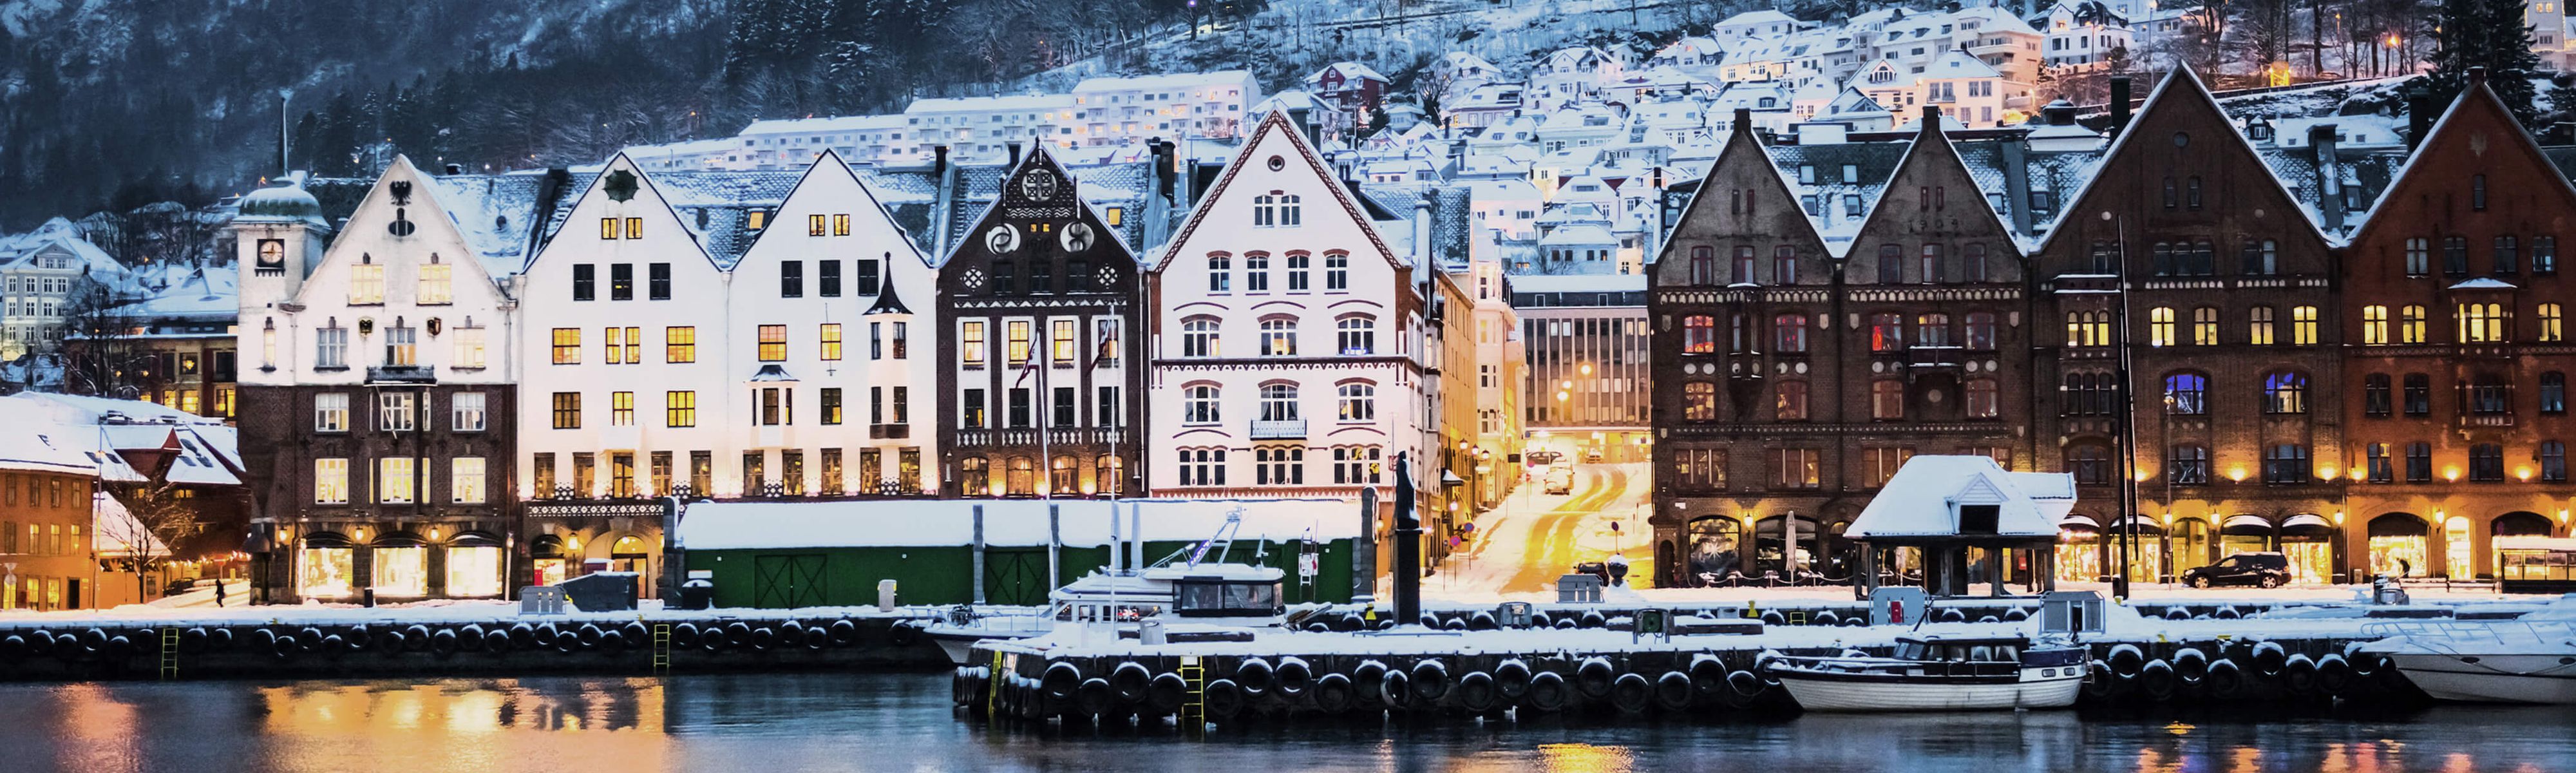 snow capped buildings in bergen norway during the evening